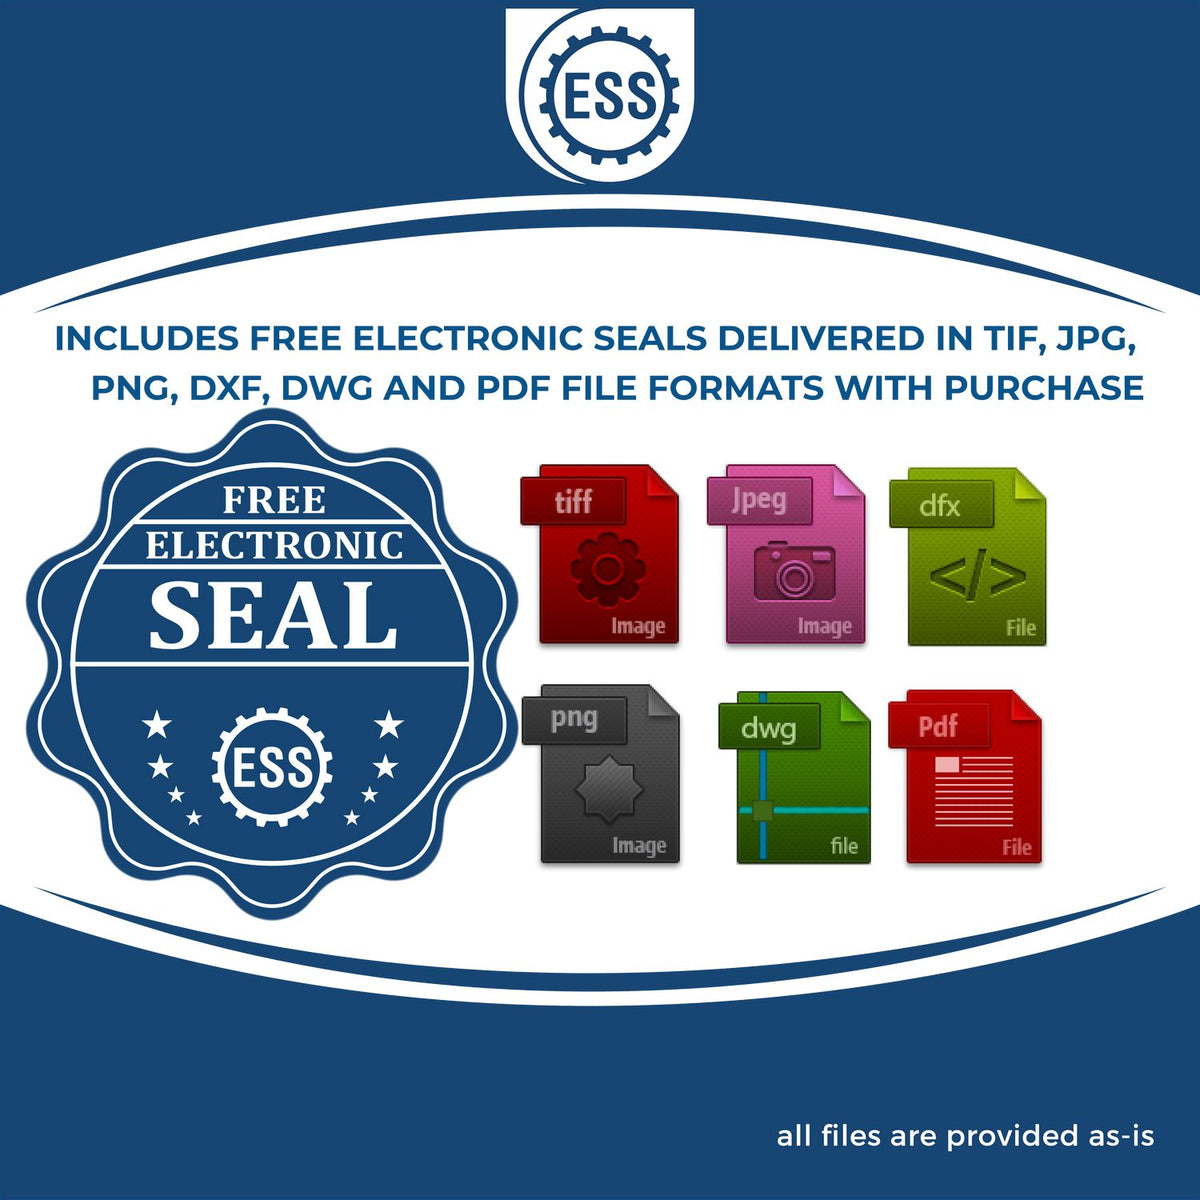 An infographic for the free electronic seal for the Self-Inking Missouri Geologist Stamp illustrating the different file type icons such as DXF, DWG, TIF, JPG and PNG.